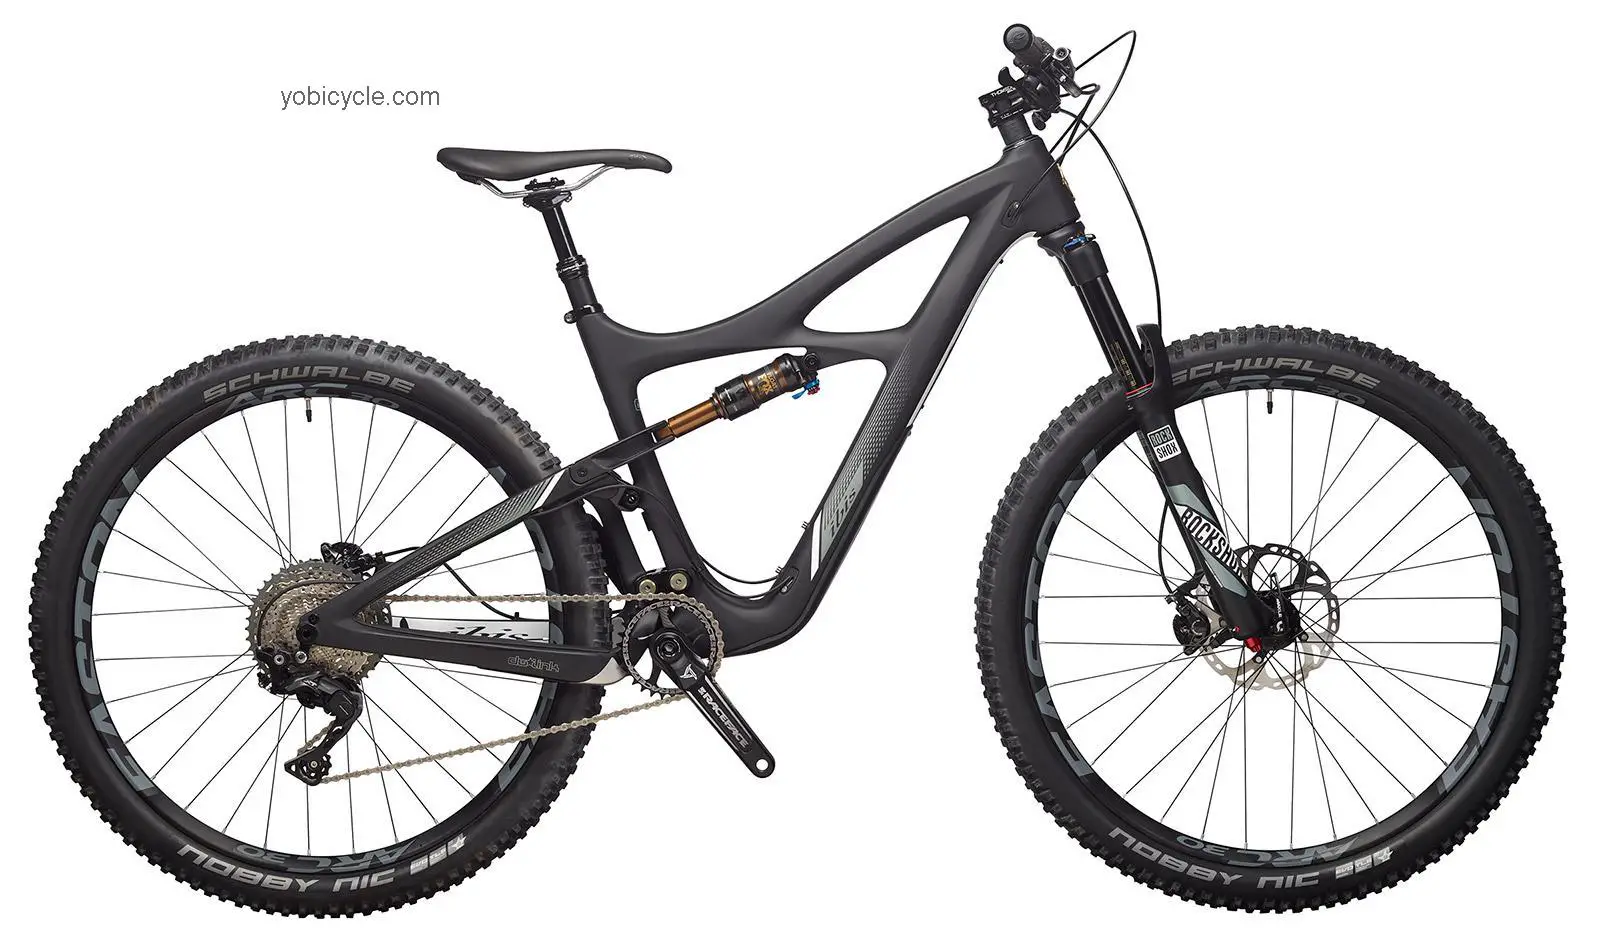 Ibis Mojo 3 XT 1X competitors and comparison tool online specs and performance